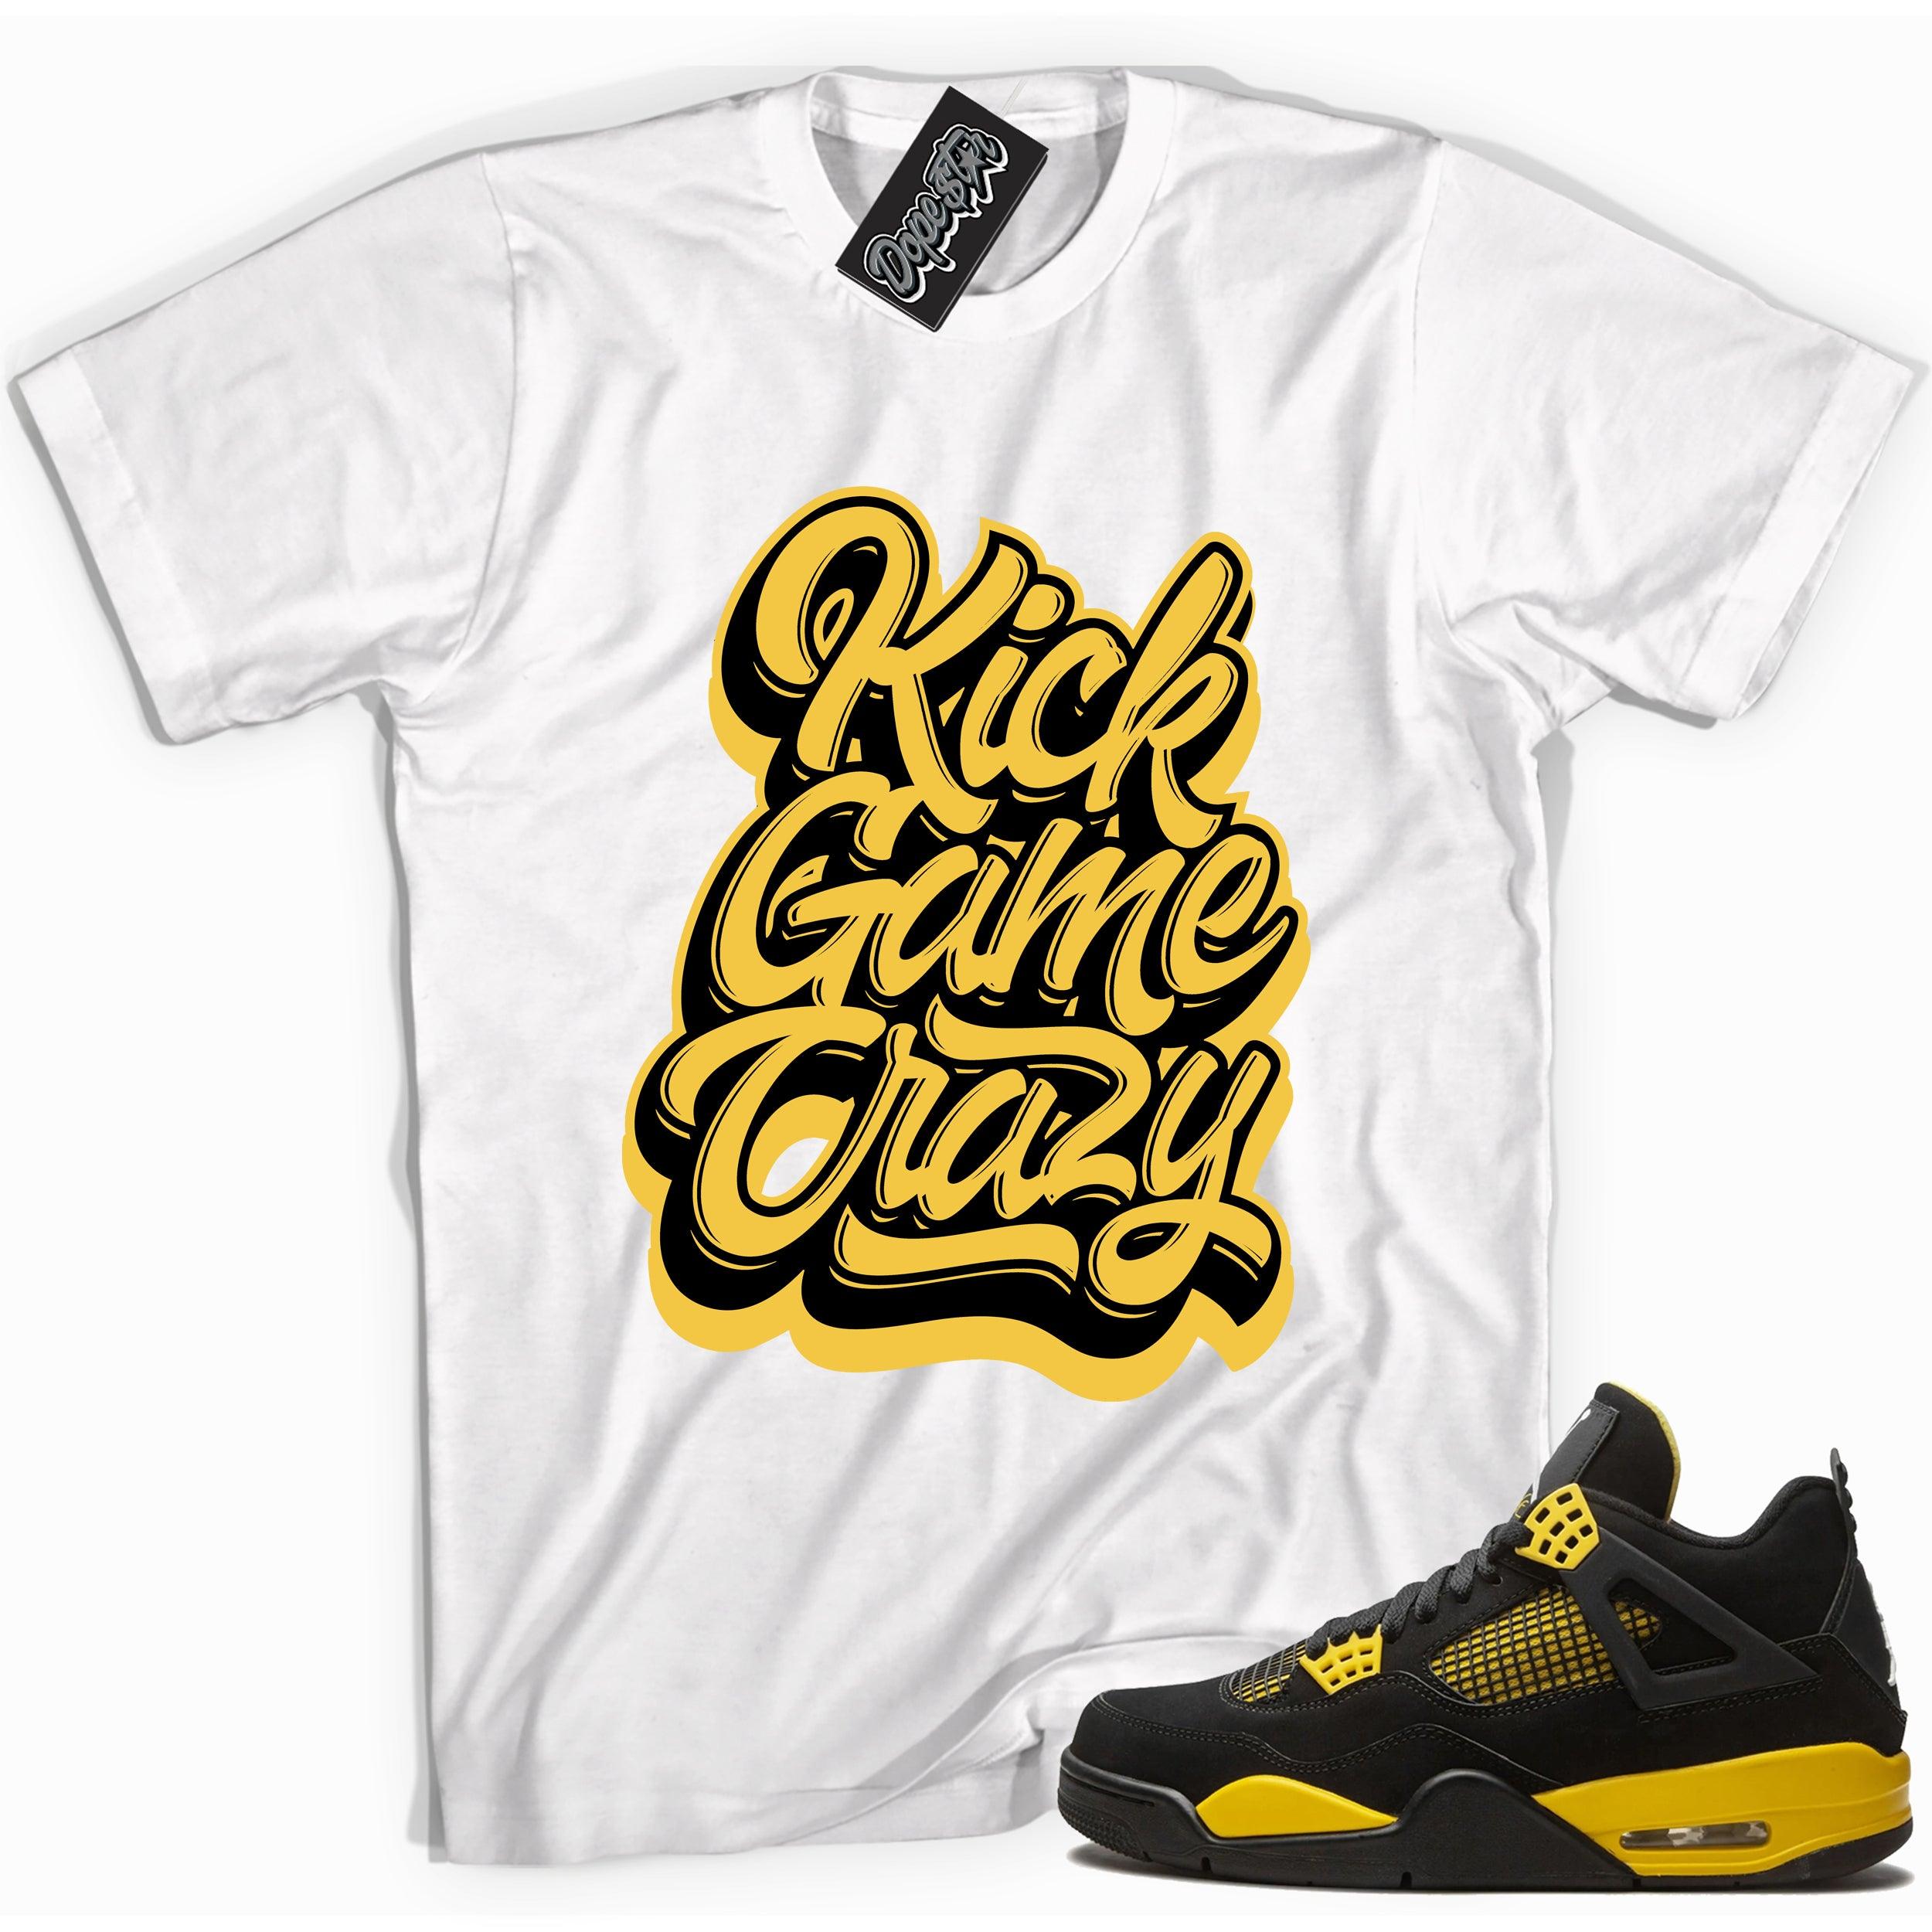 Cool white graphic tee with 'kick game crazy' print, that perfectly matches Air Jordan 4 Thunder sneakers